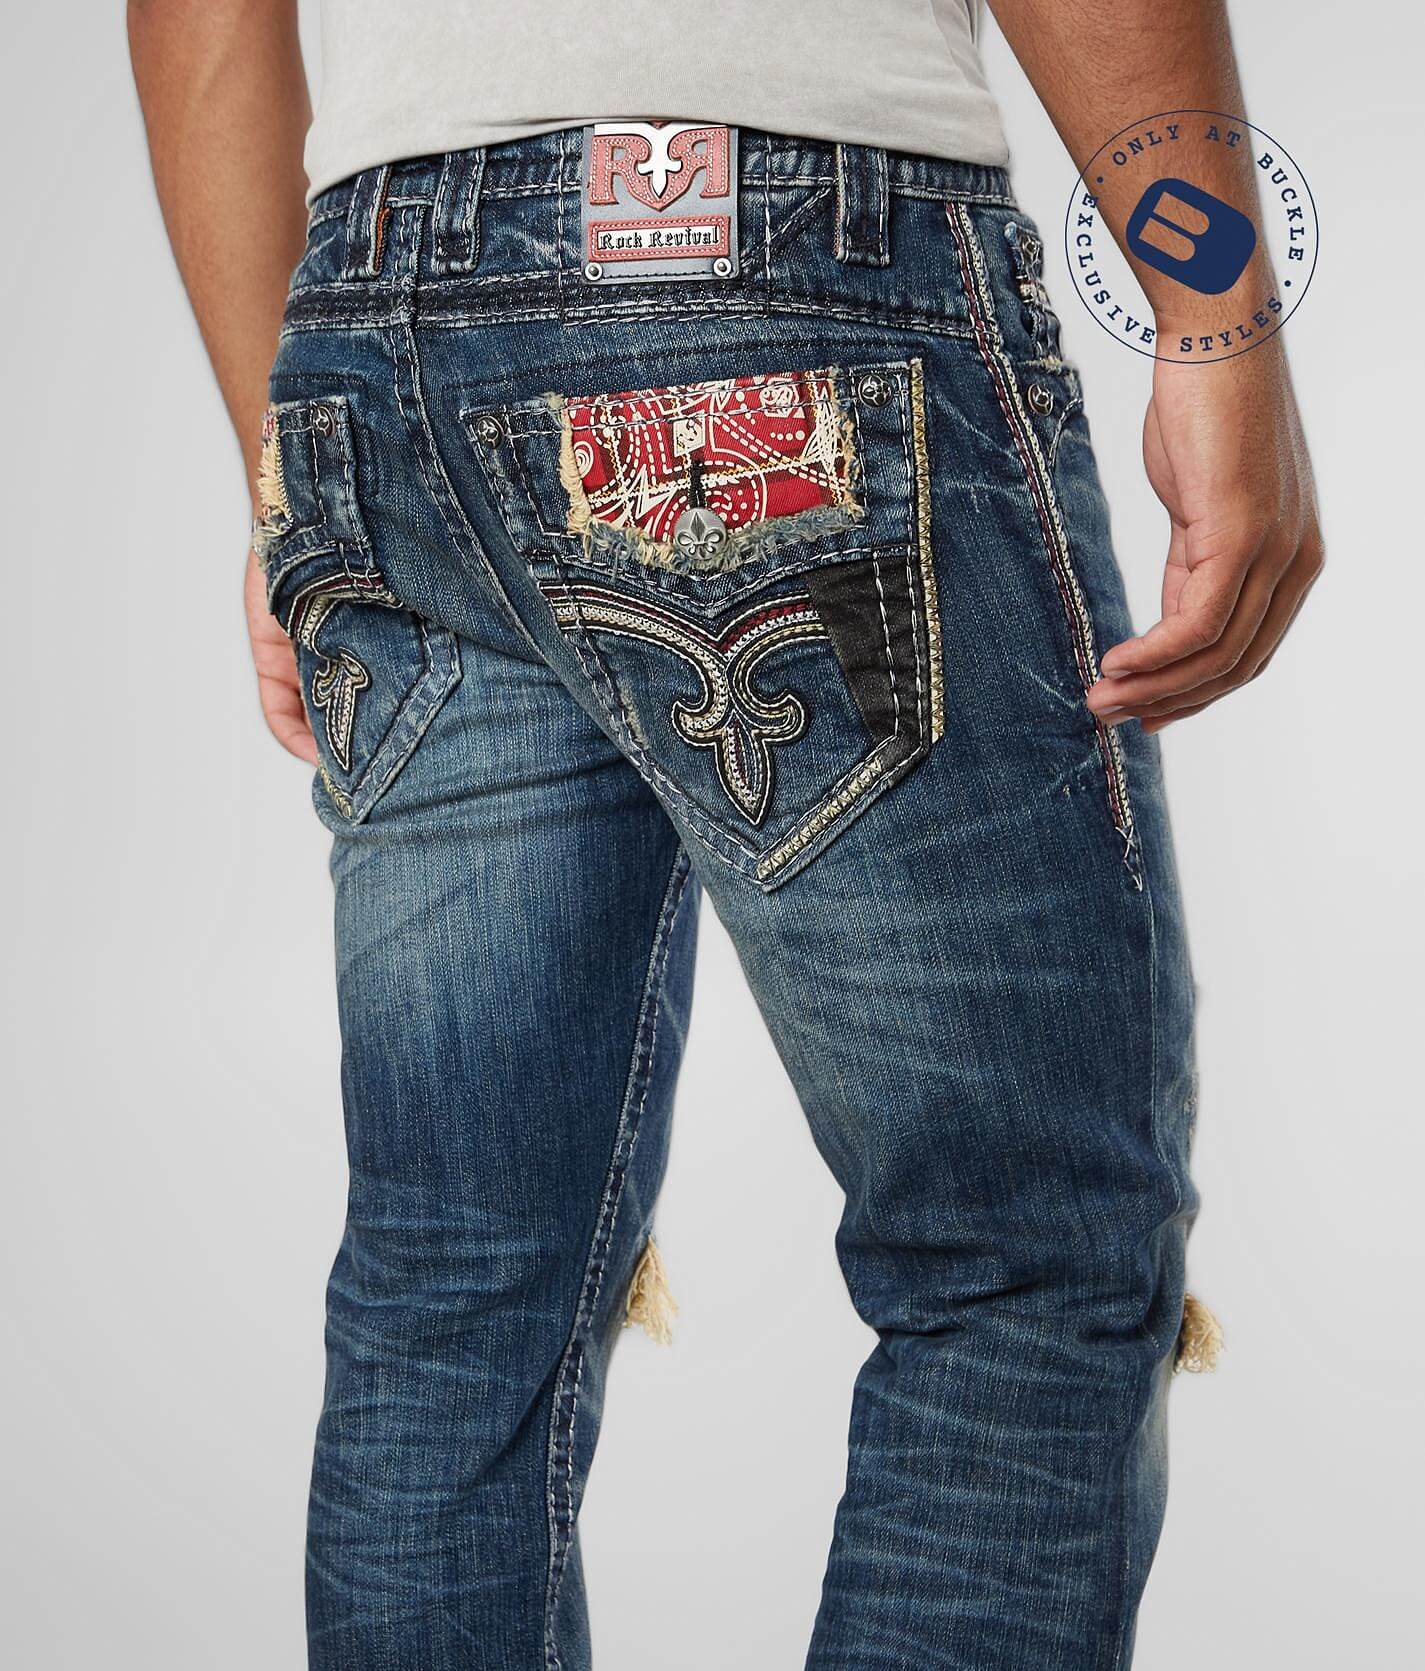 buckle jeans